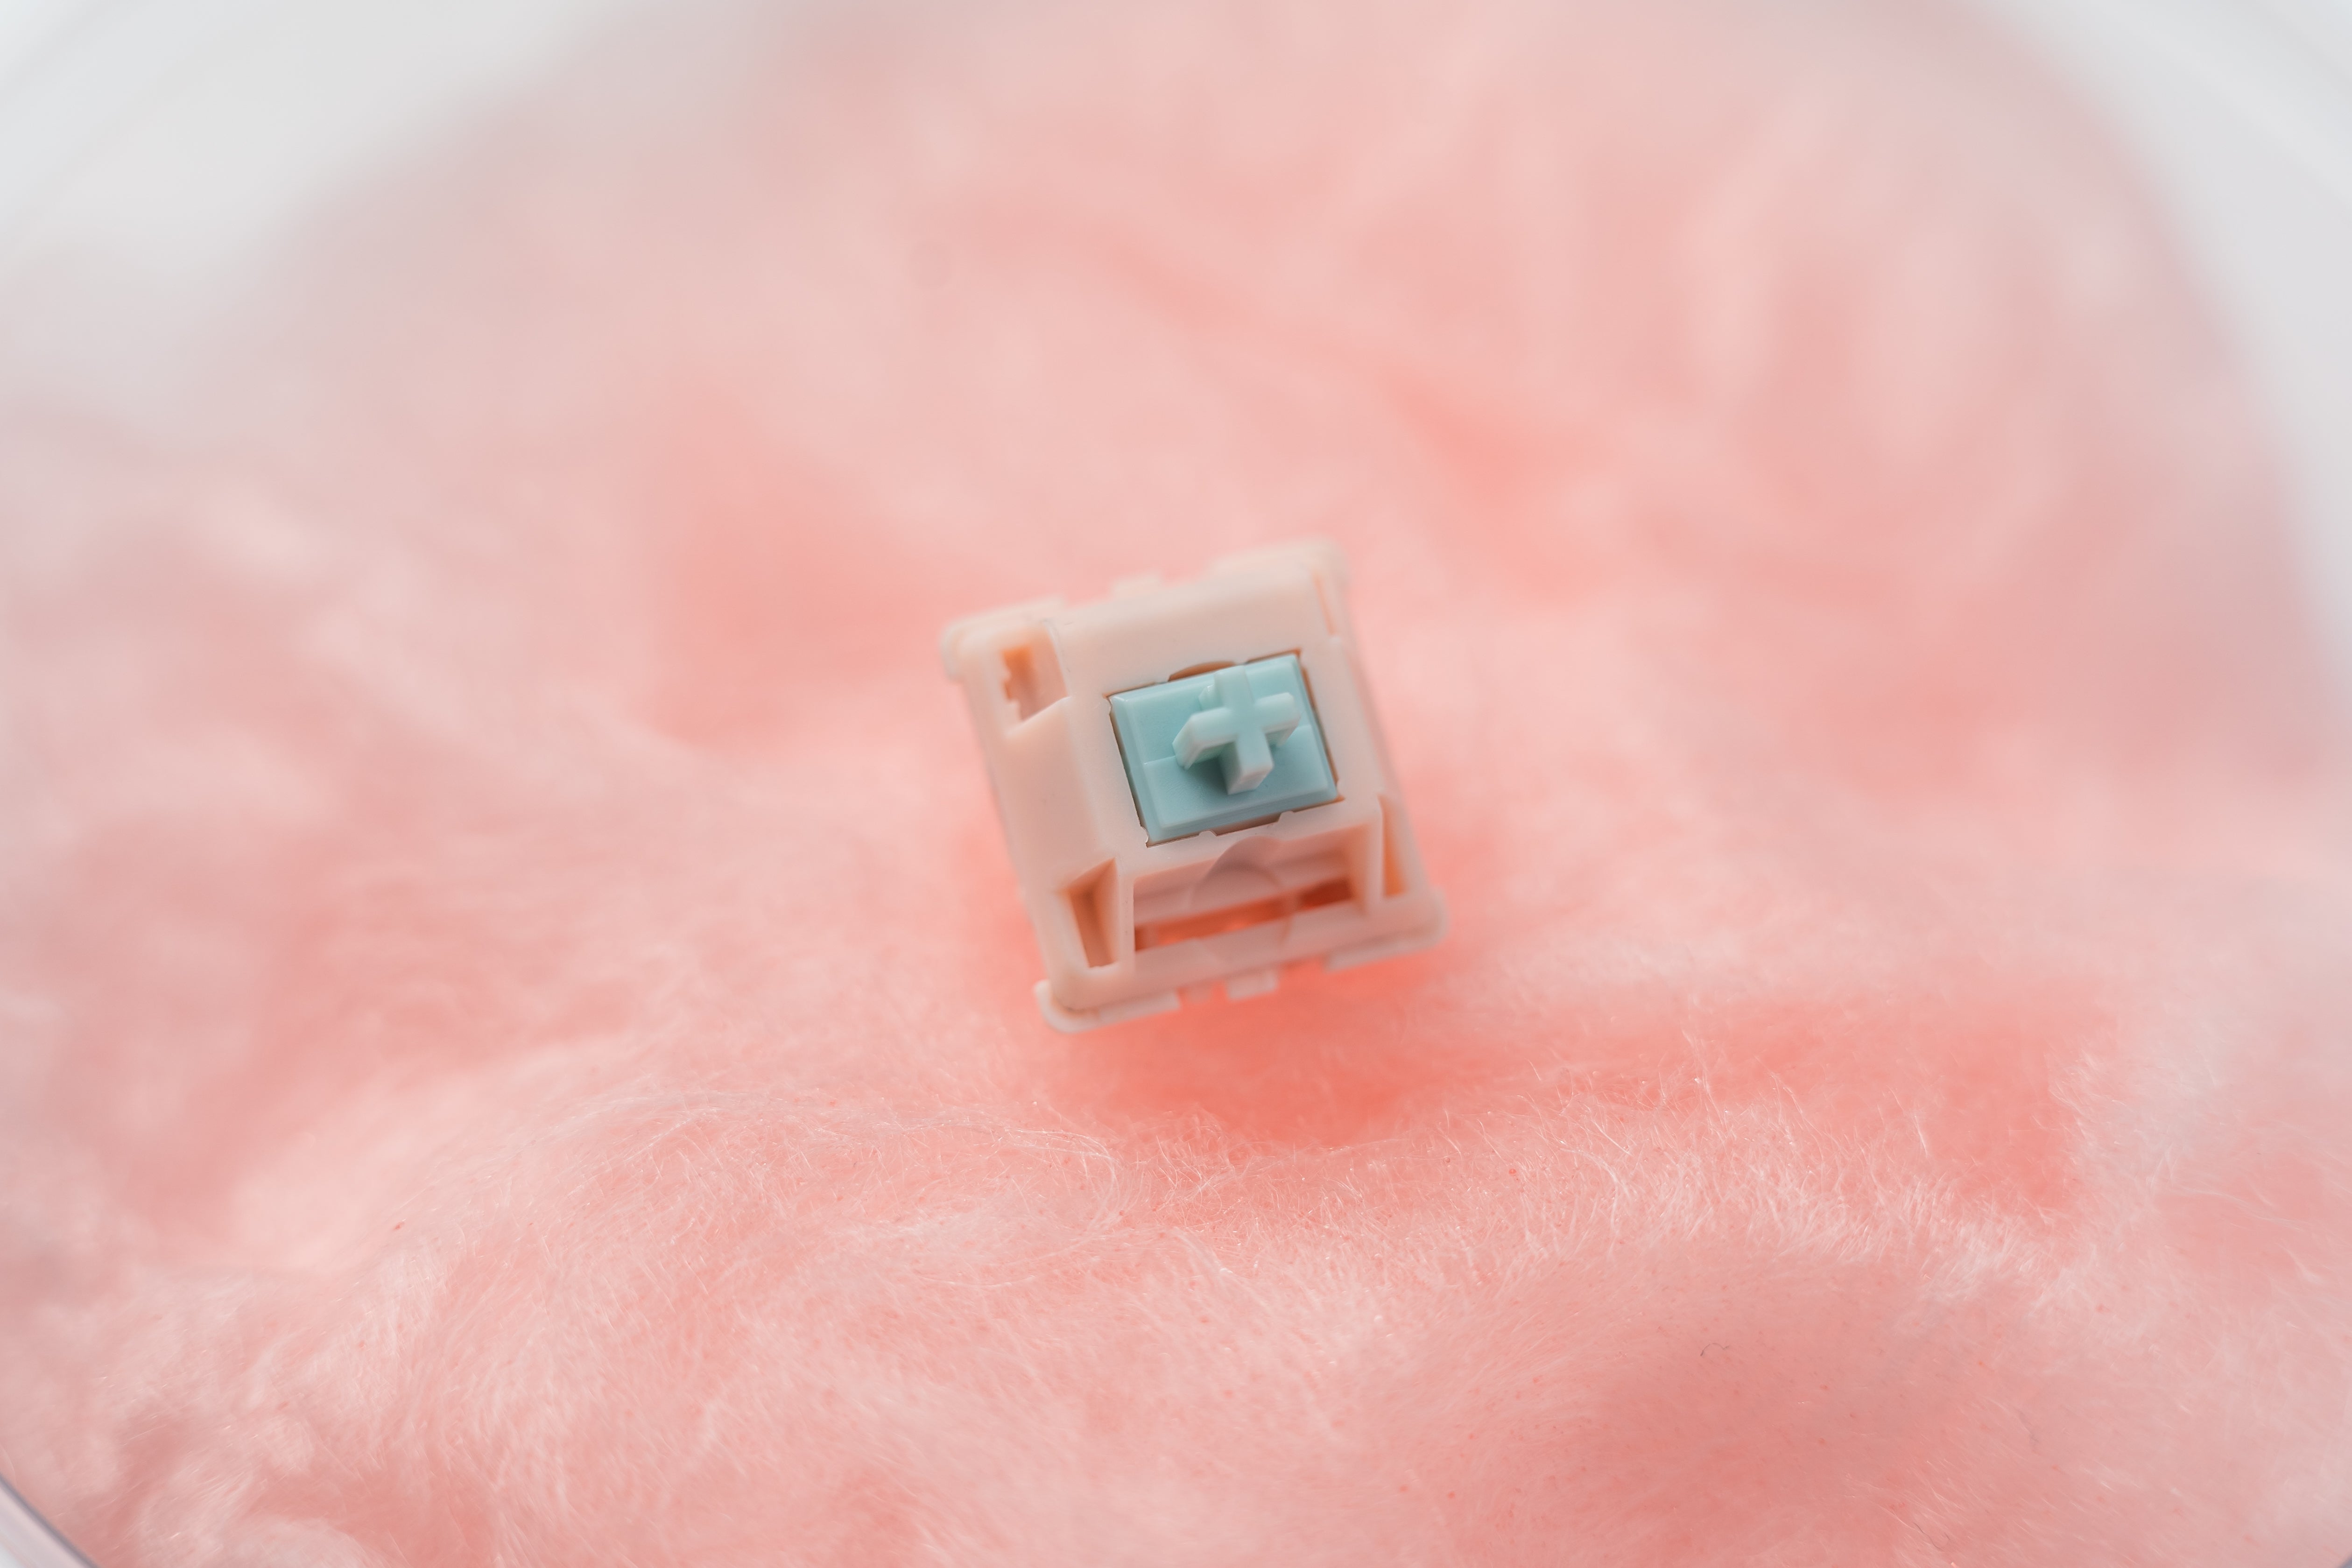 Cotton Candy Switches